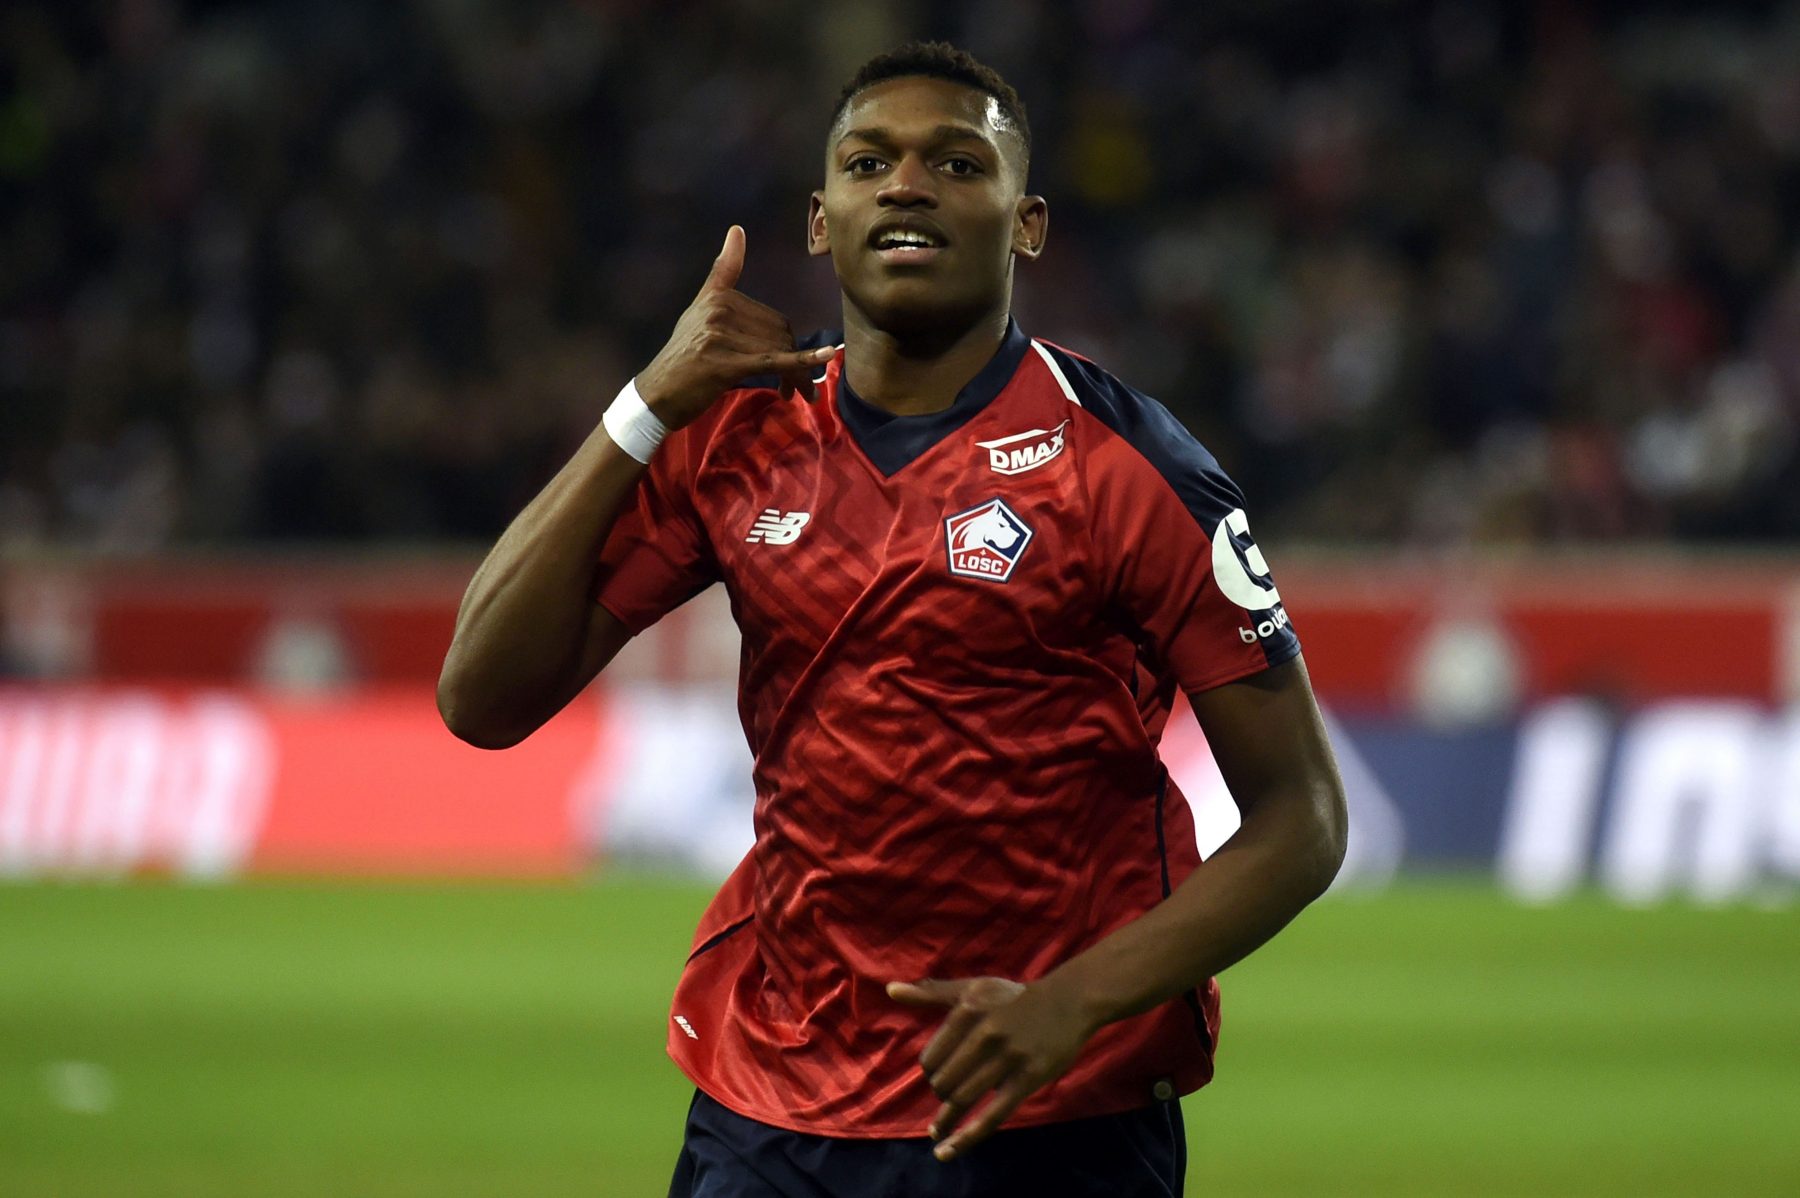 Lille's Rafael Leao celebrates after scoring a goal during the French L1 football match between Lille (L1) and Toulouse on December 22 2018 at the Pierre Mauroy Stadium in Villenueve-d'Ascq. (Photo by FRANCOIS LO PRESTI / AFP) (Photo credit should read FRANCOIS LO PRESTI/AFP/Getty Images)